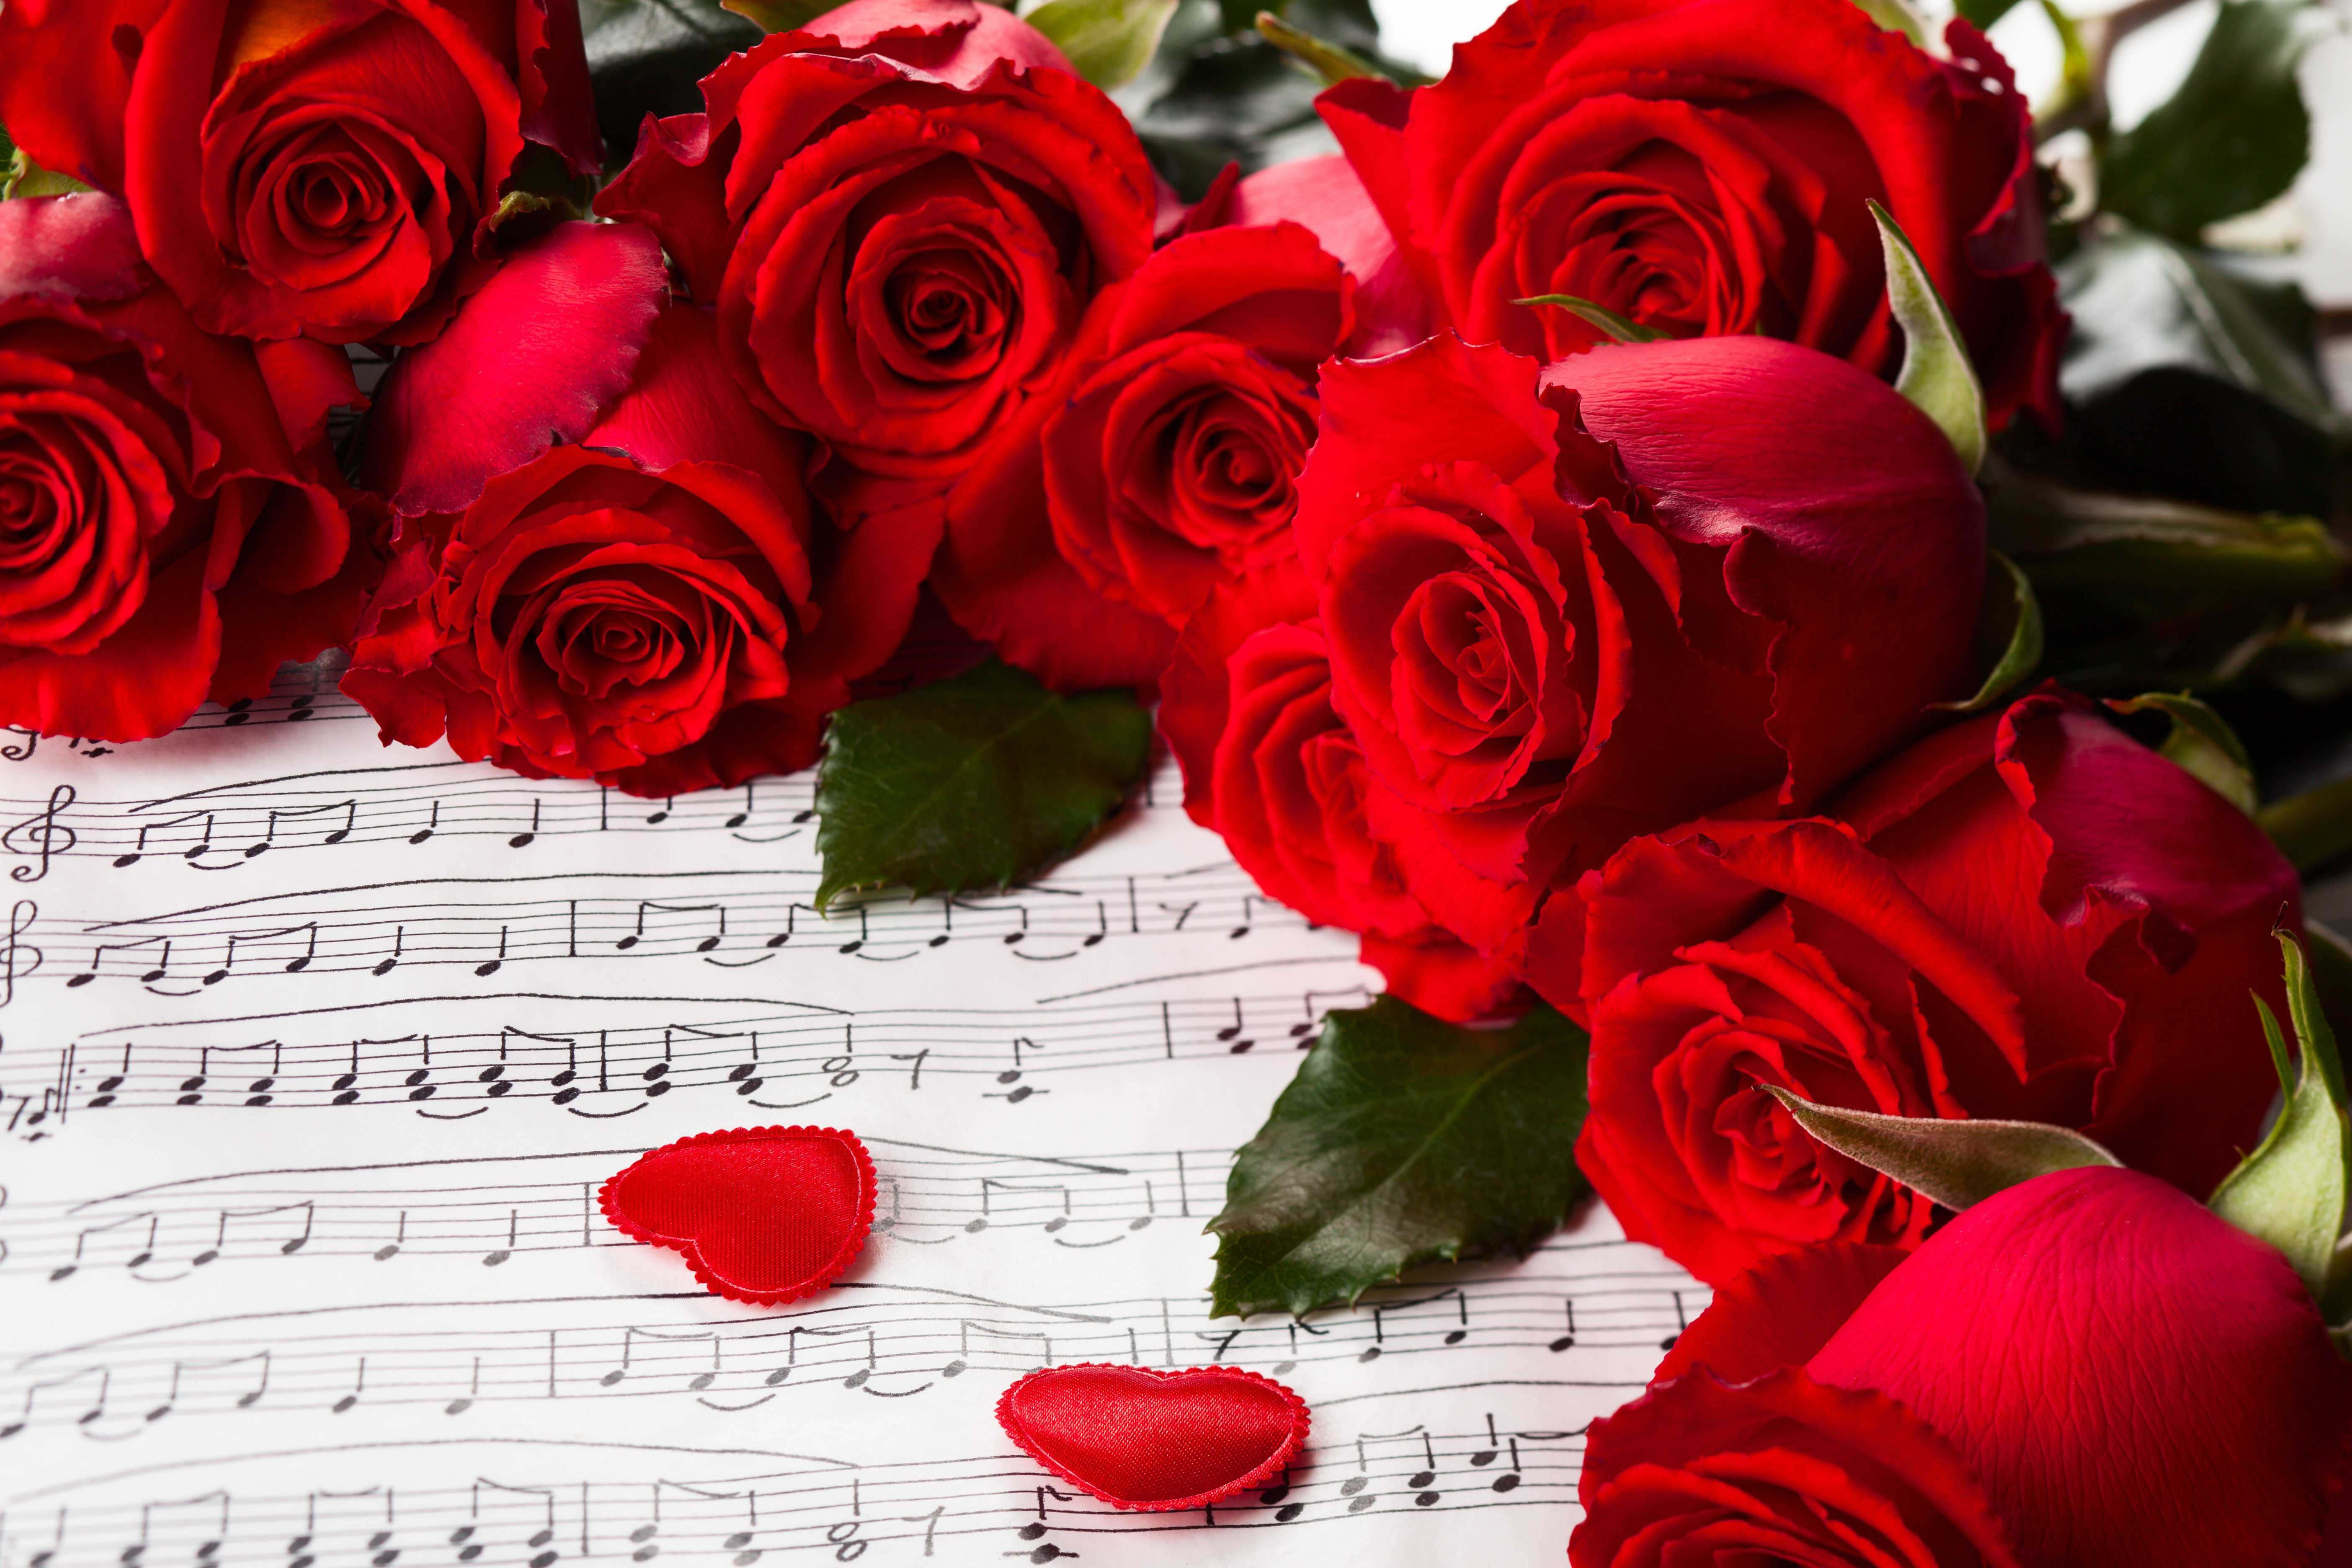 Love Roses And Hearts Wallpaper For Android Zkcl Flowers Background